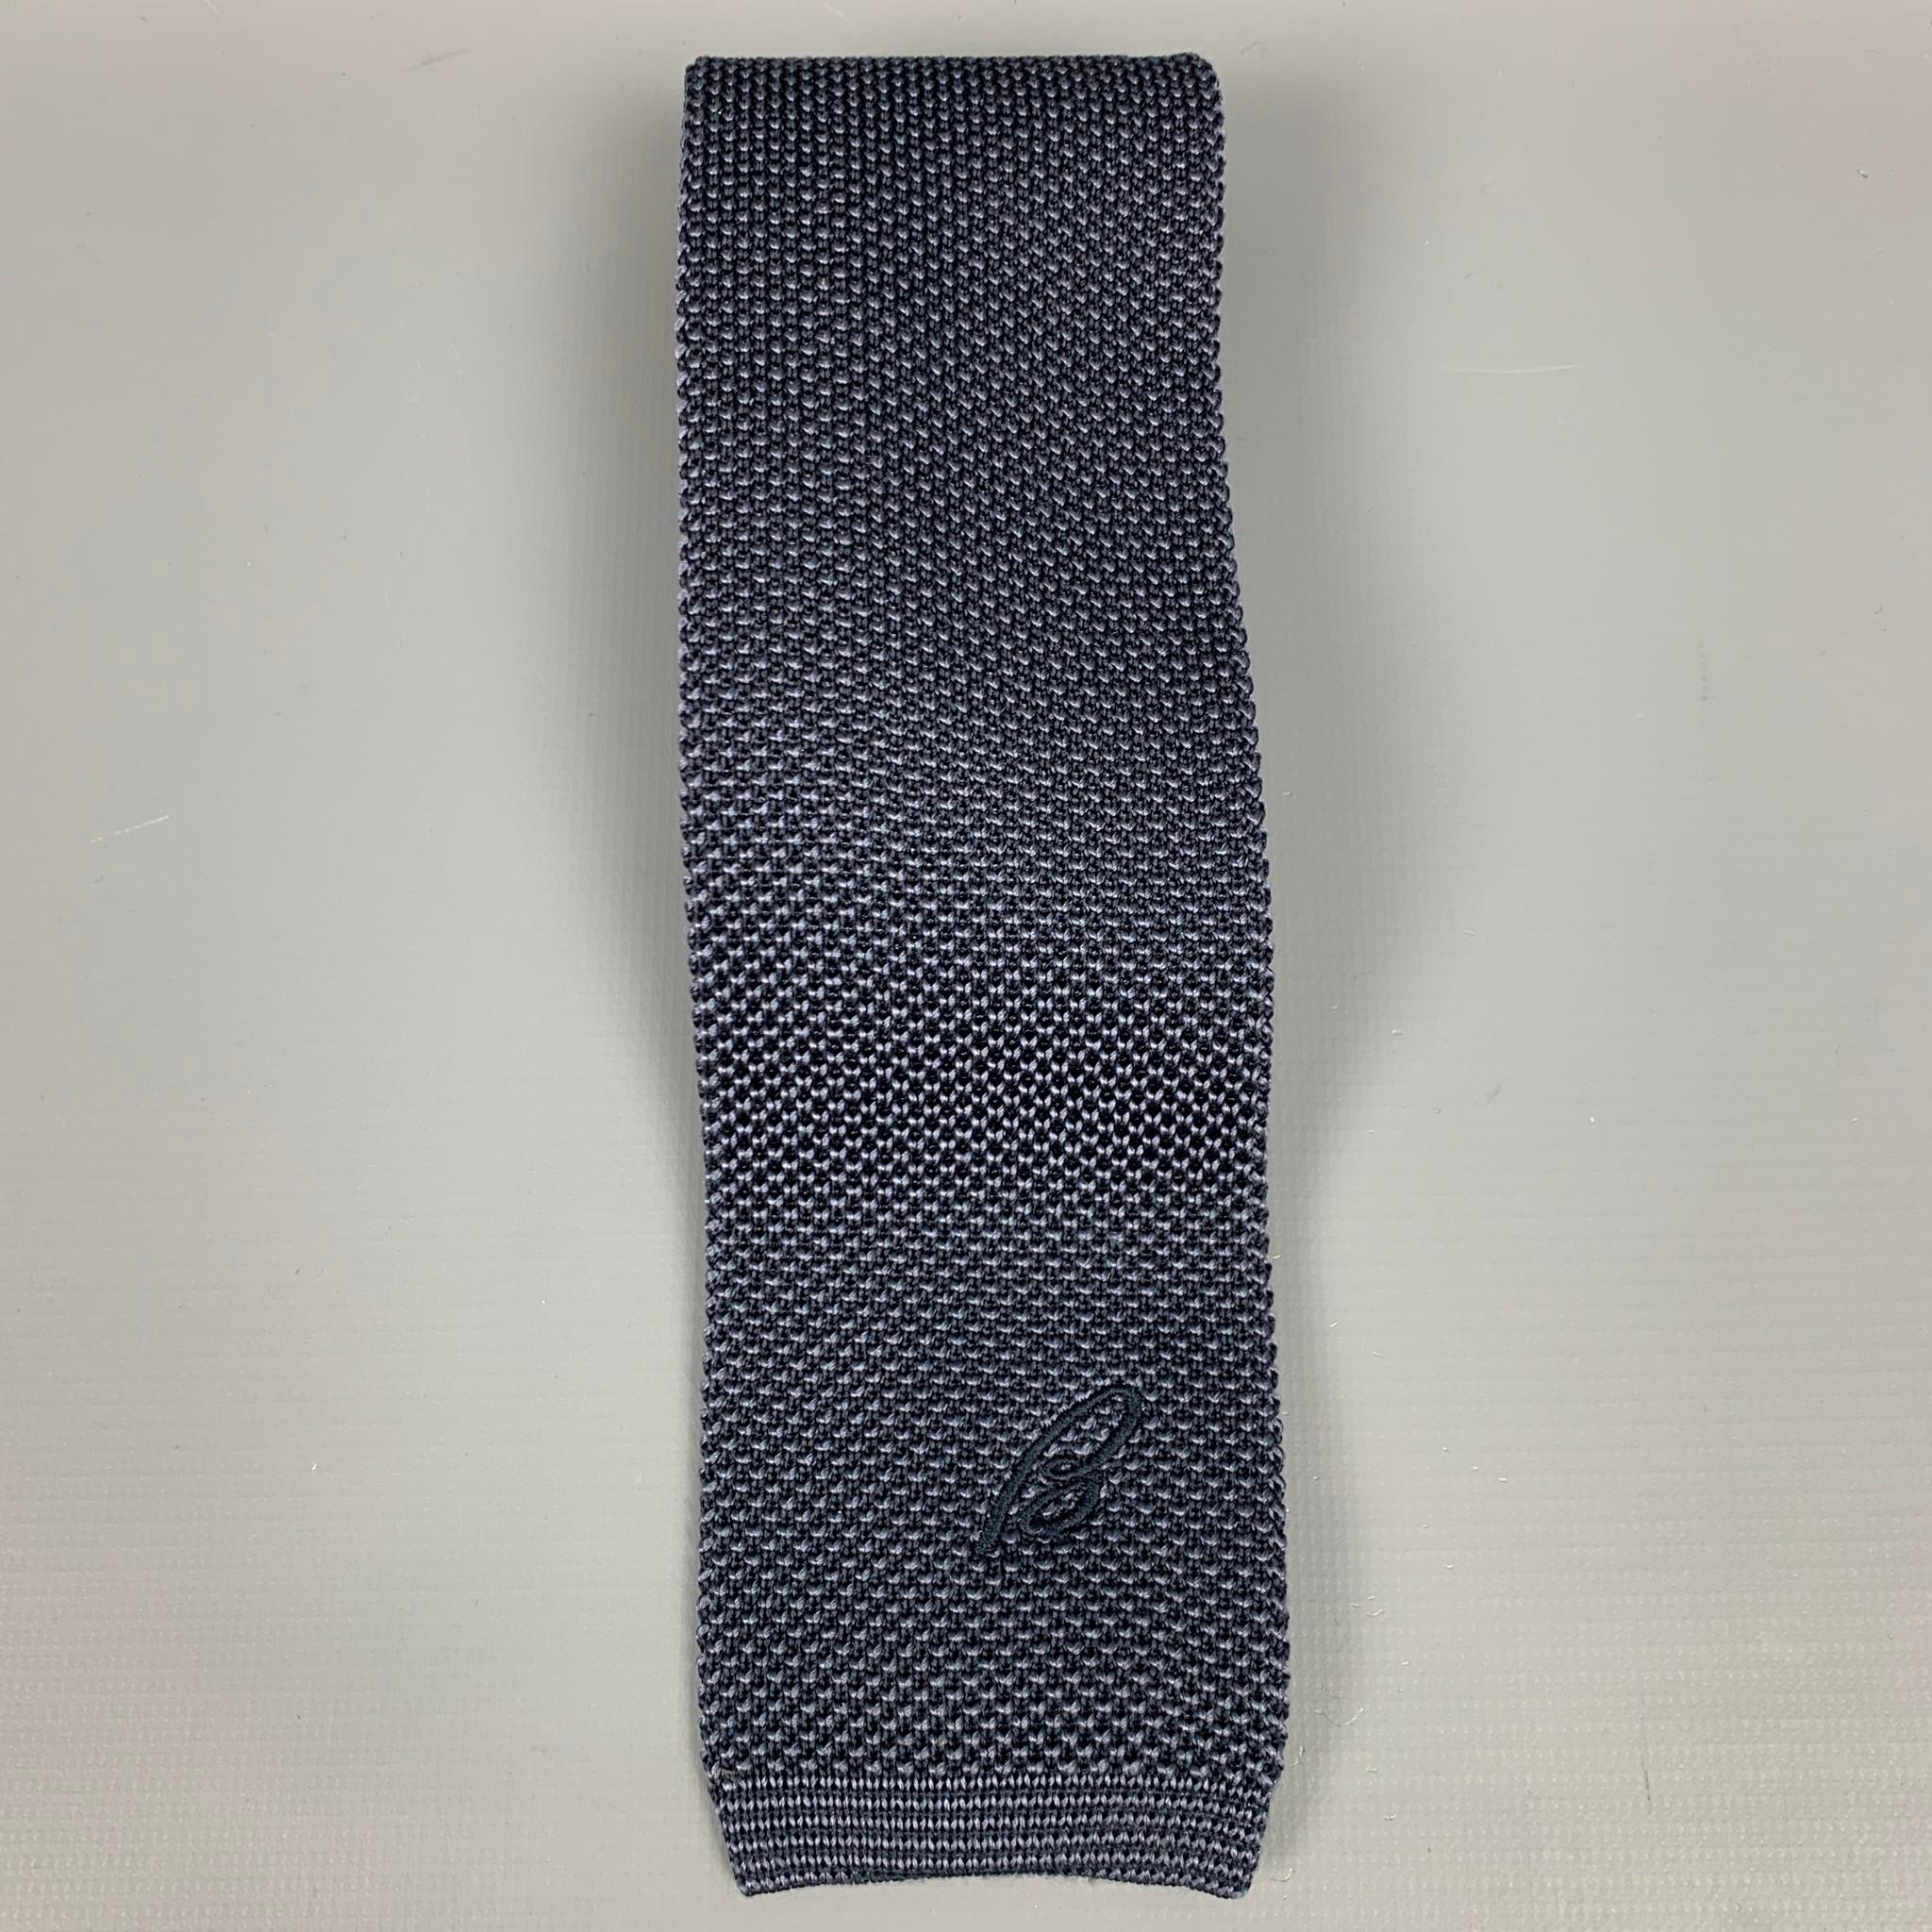 BRIONI neck tie comes in a navy knitted silk. Made in Italy.

Very Good Pre-Owned Condition.

Measurements:

Width: 3.25 in. 